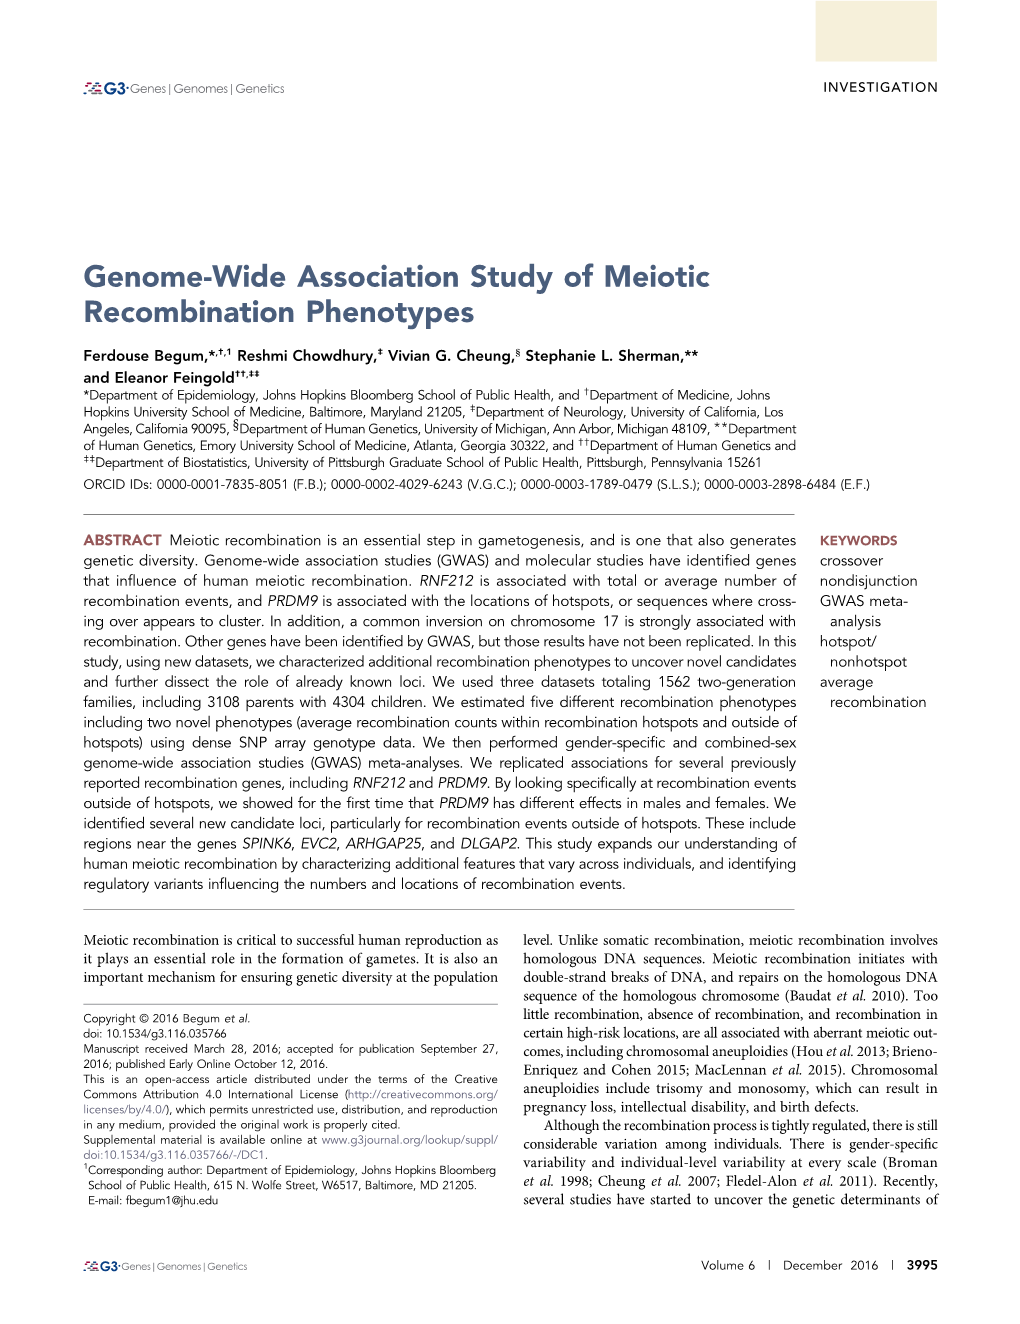 Genome-Wide Association Study of Meiotic Recombination Phenotypes